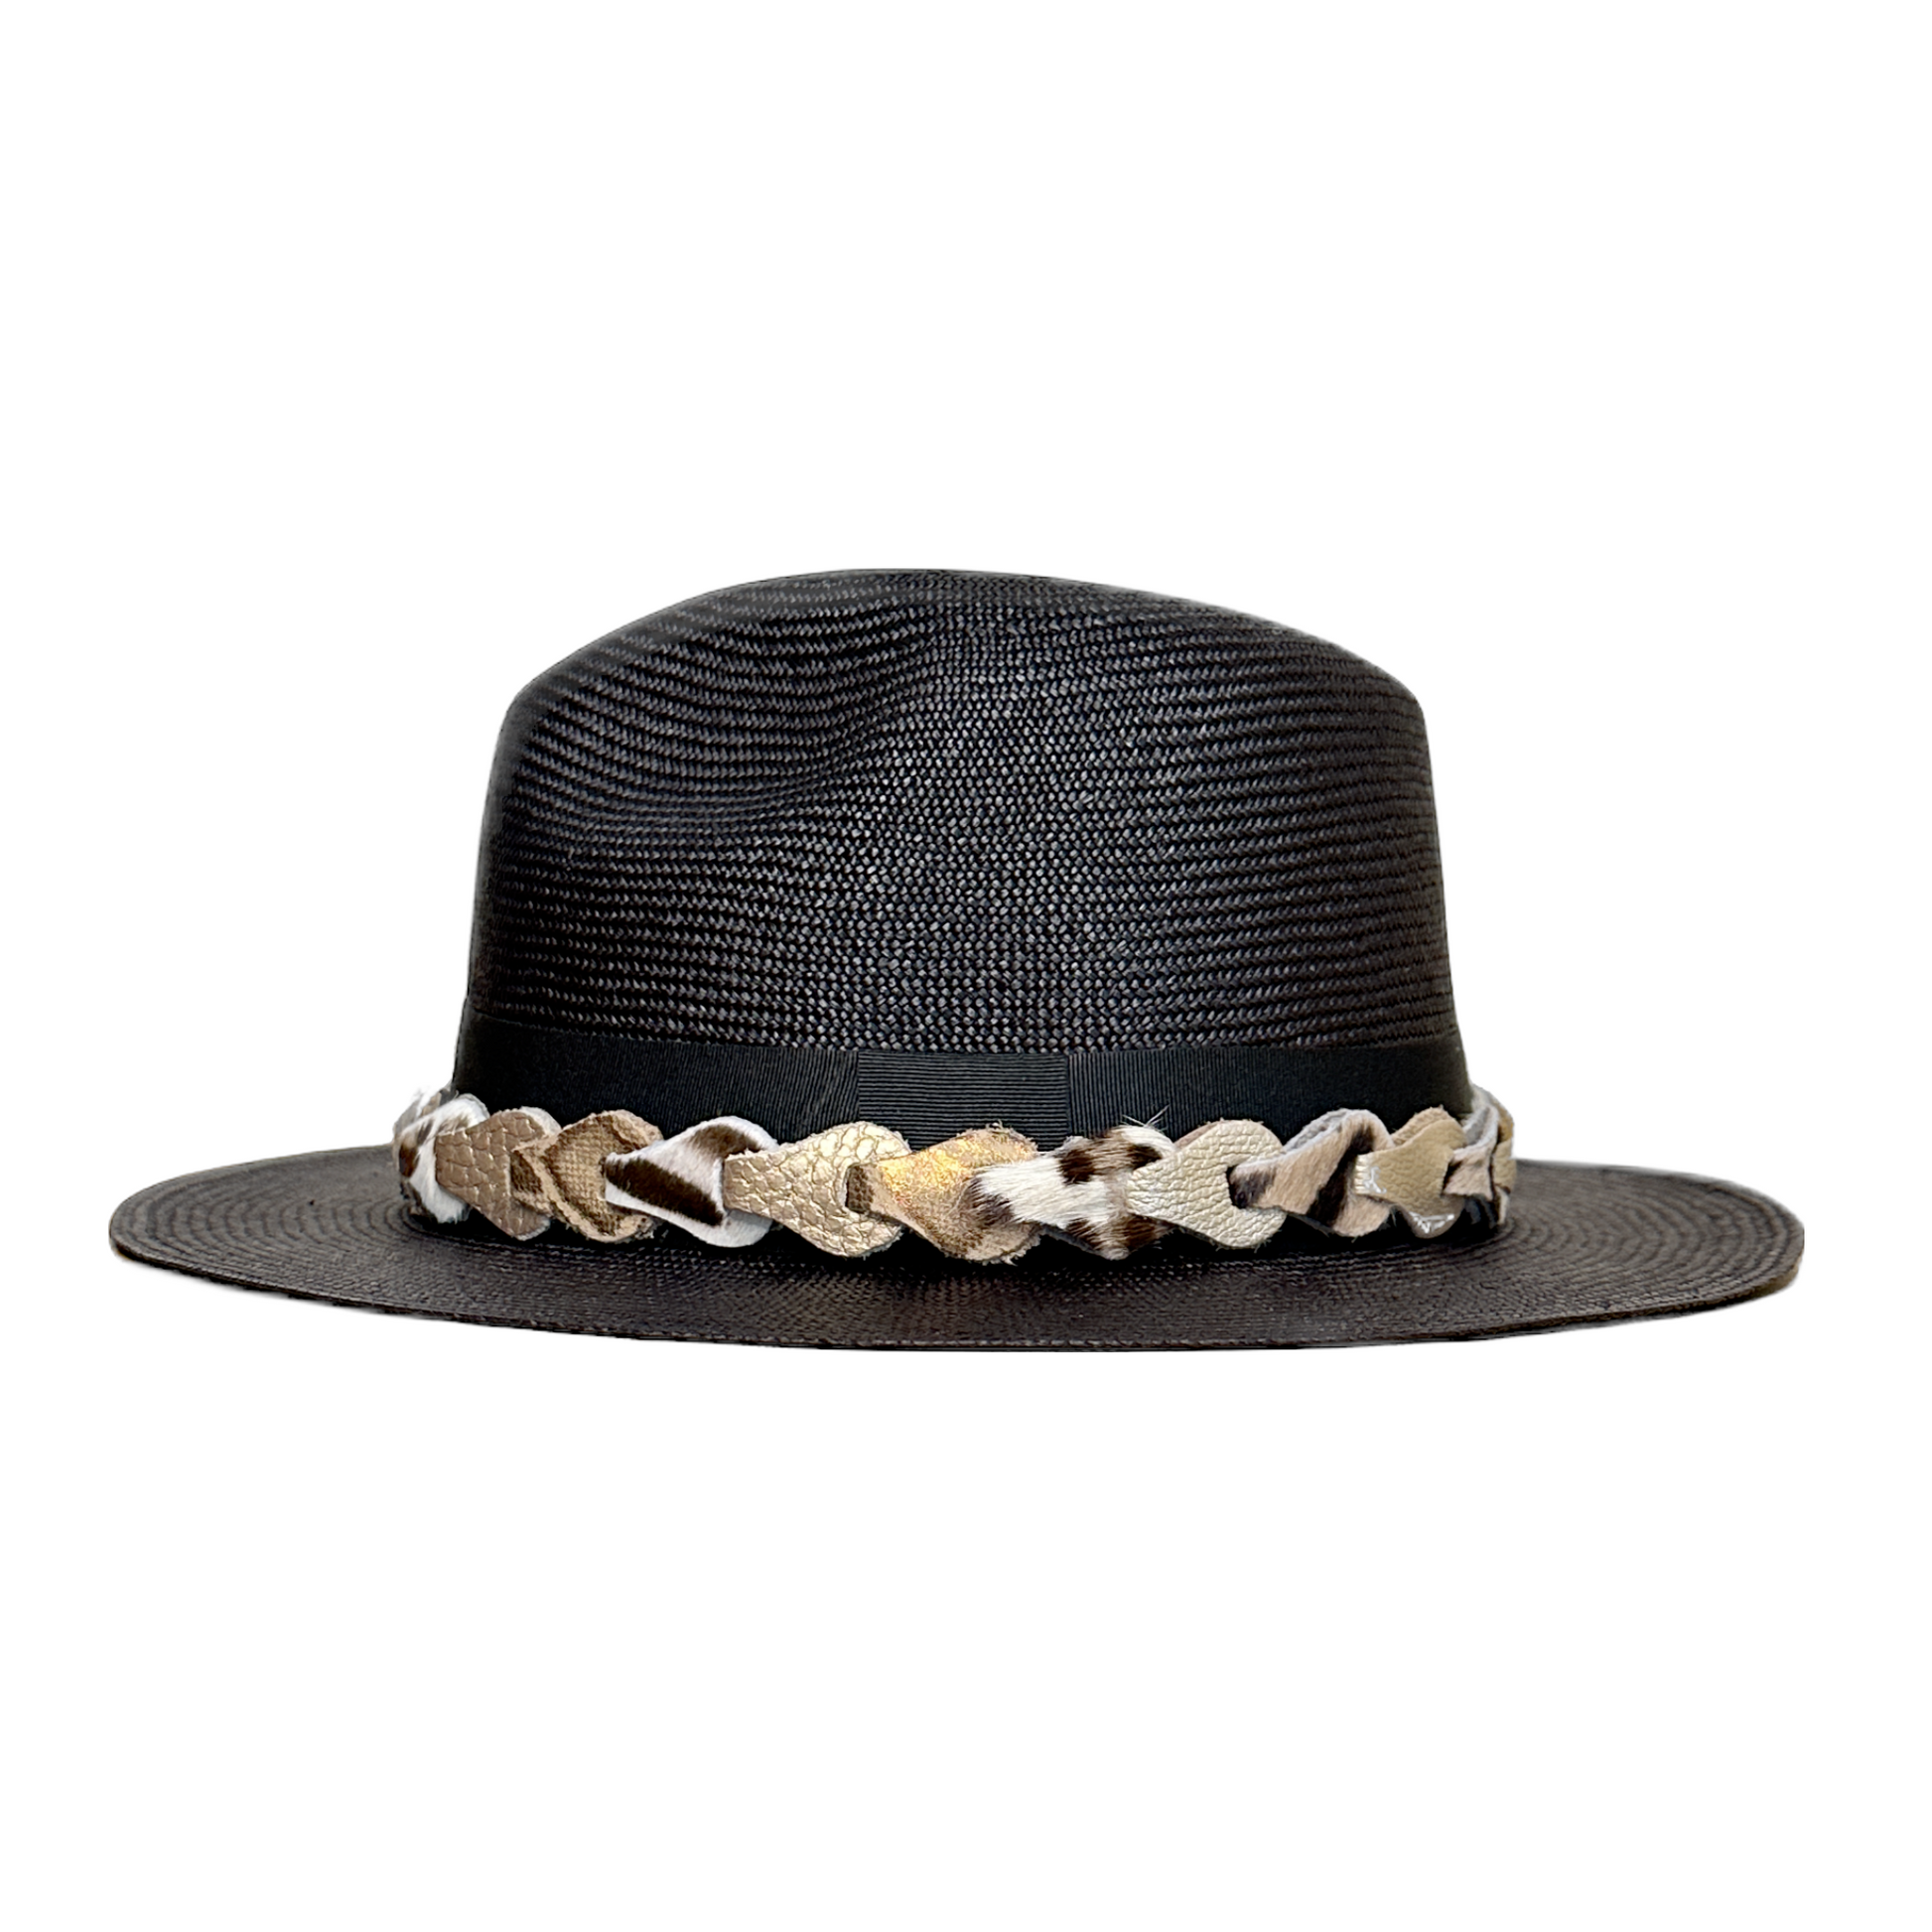 LEATHER HAT BANDS The Hip Hat